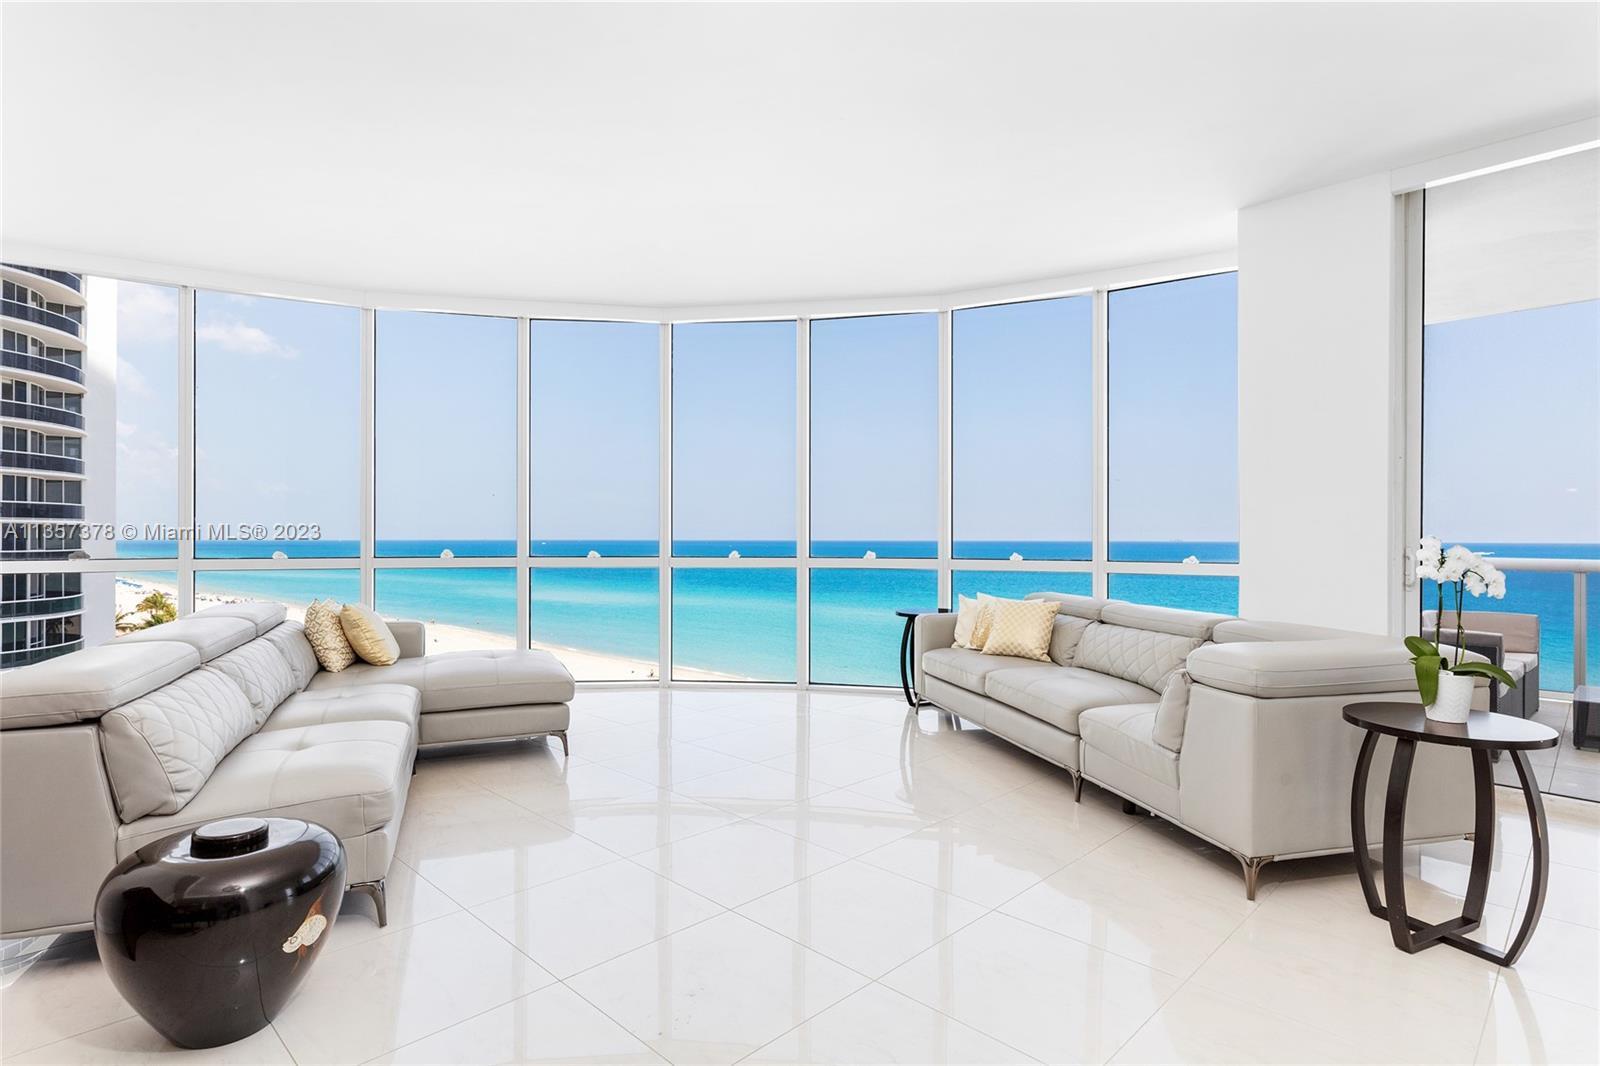 This contemporary 3BR/3+1BA at the Trump Palace in Sunny Isles Beach offers unobstructed direct ocea